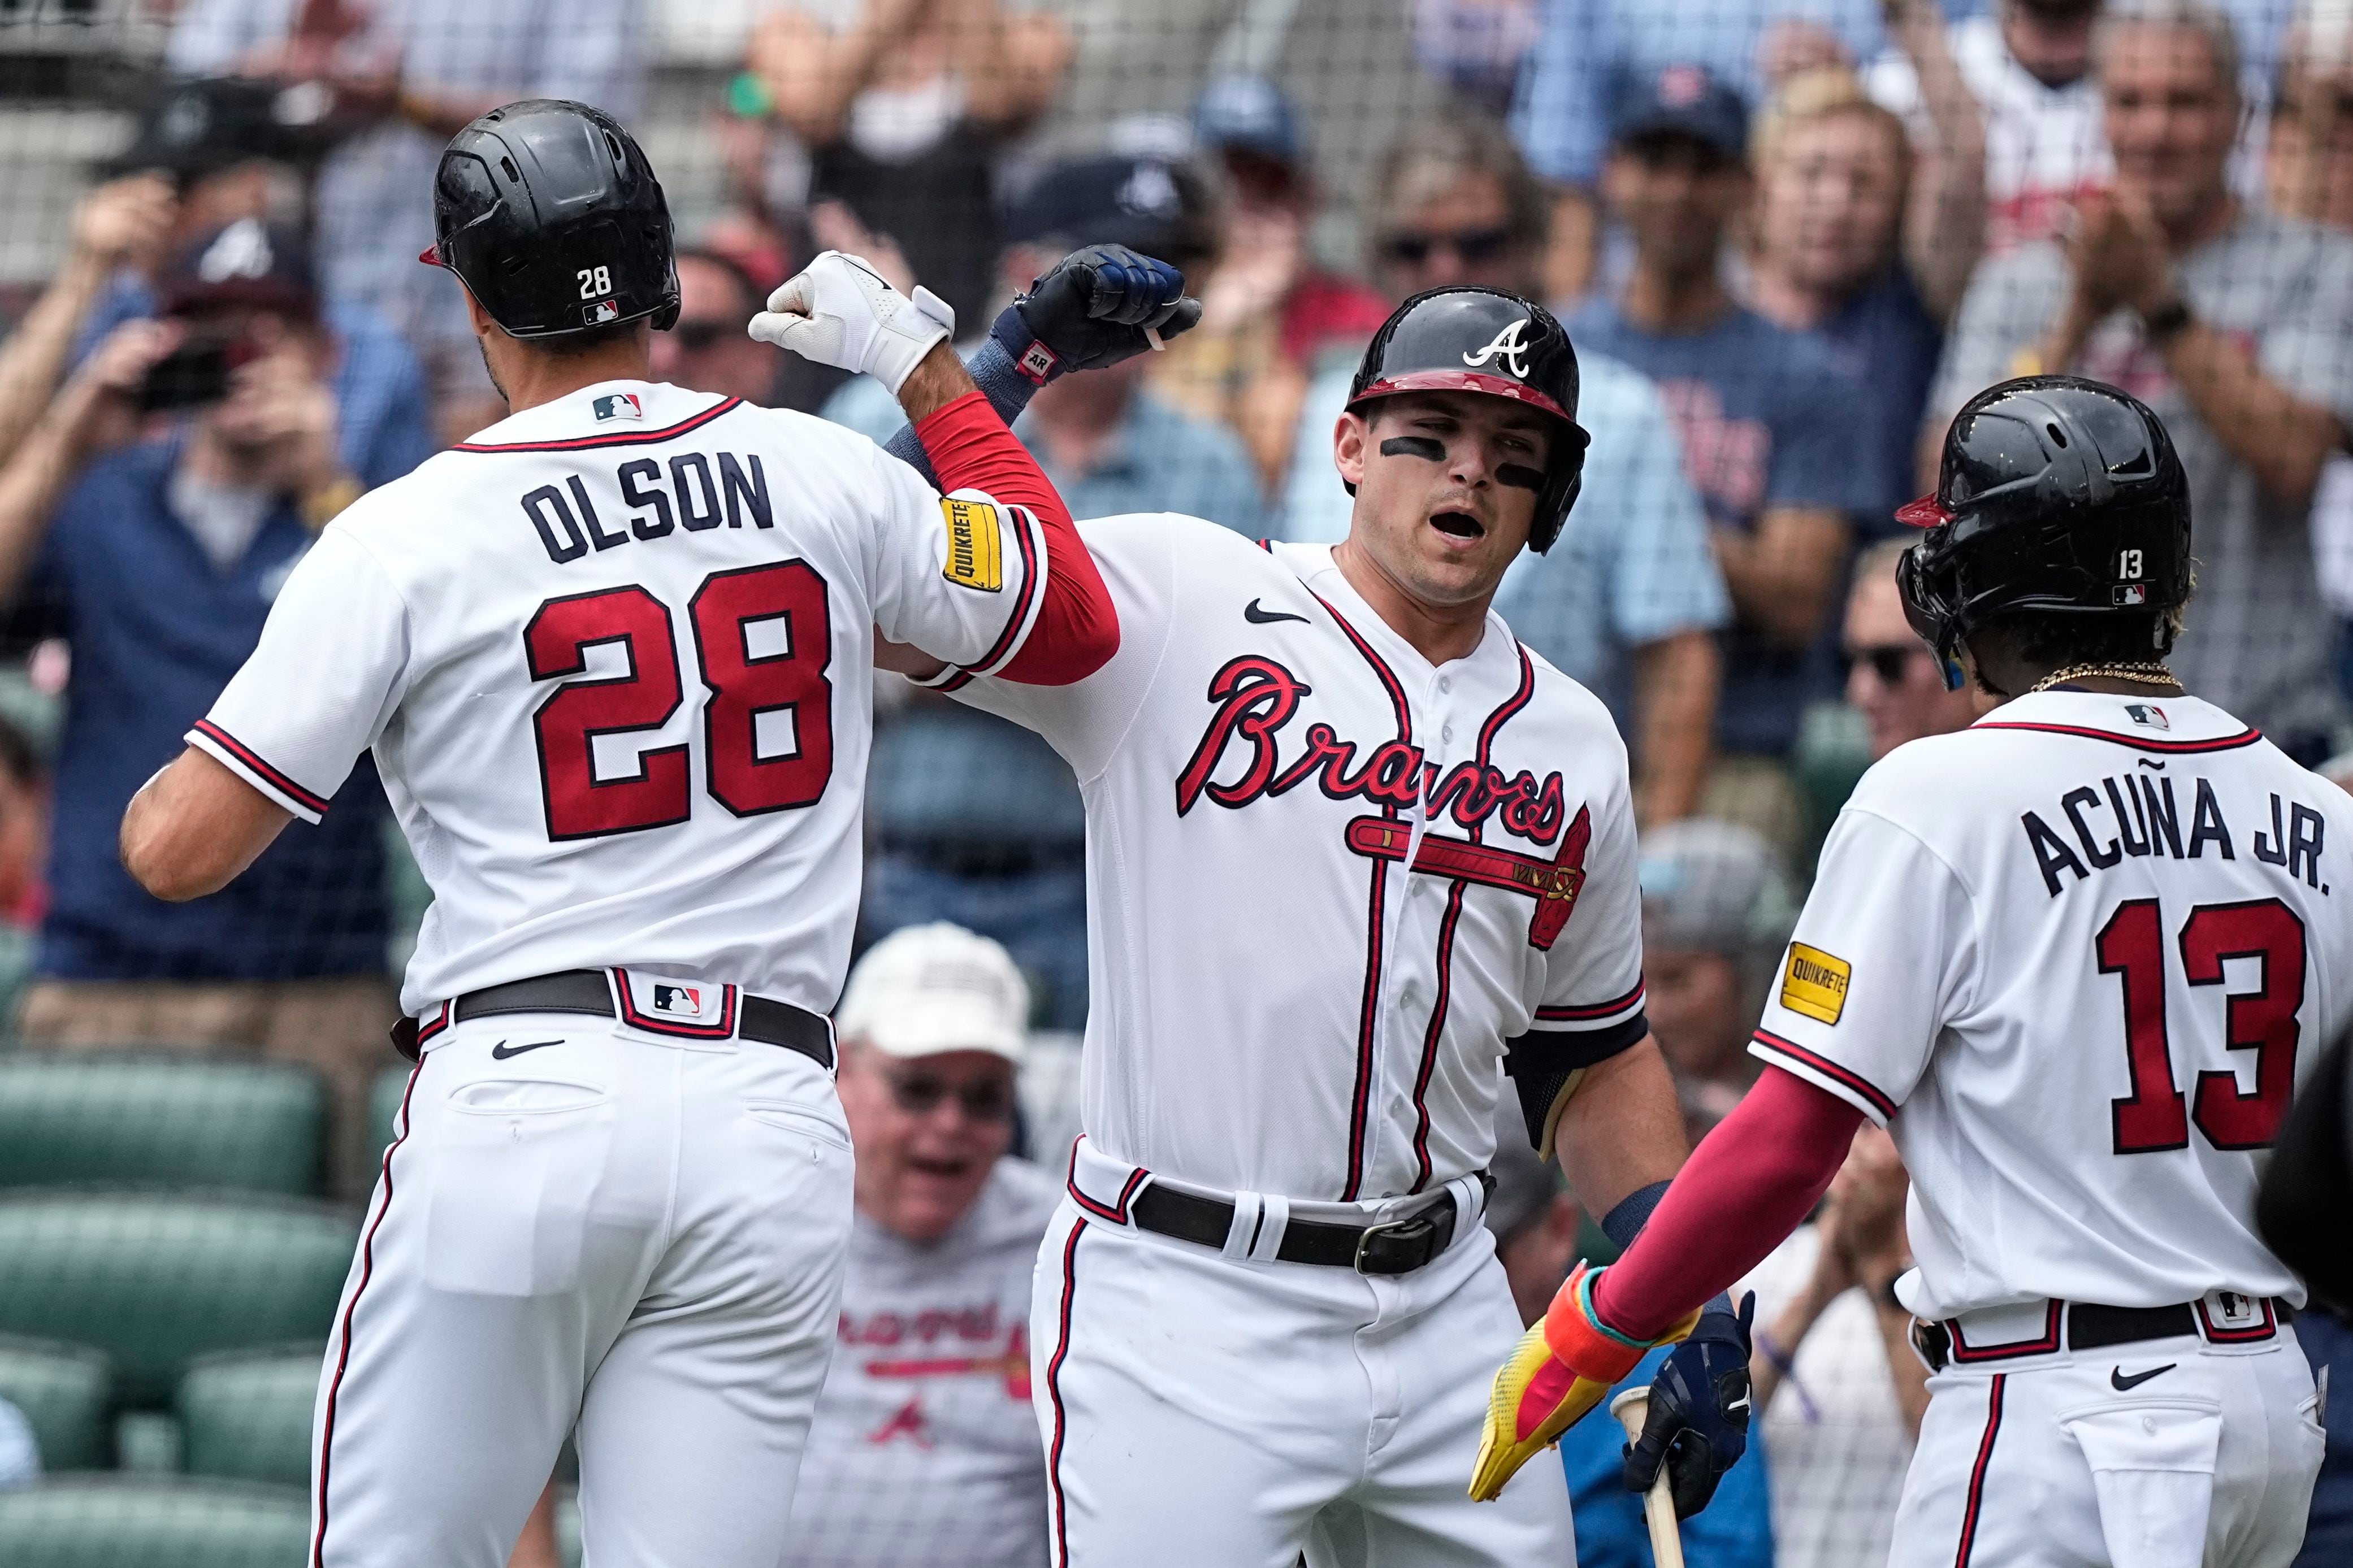 NLDS preview: 25 things to know about the Braves going into the